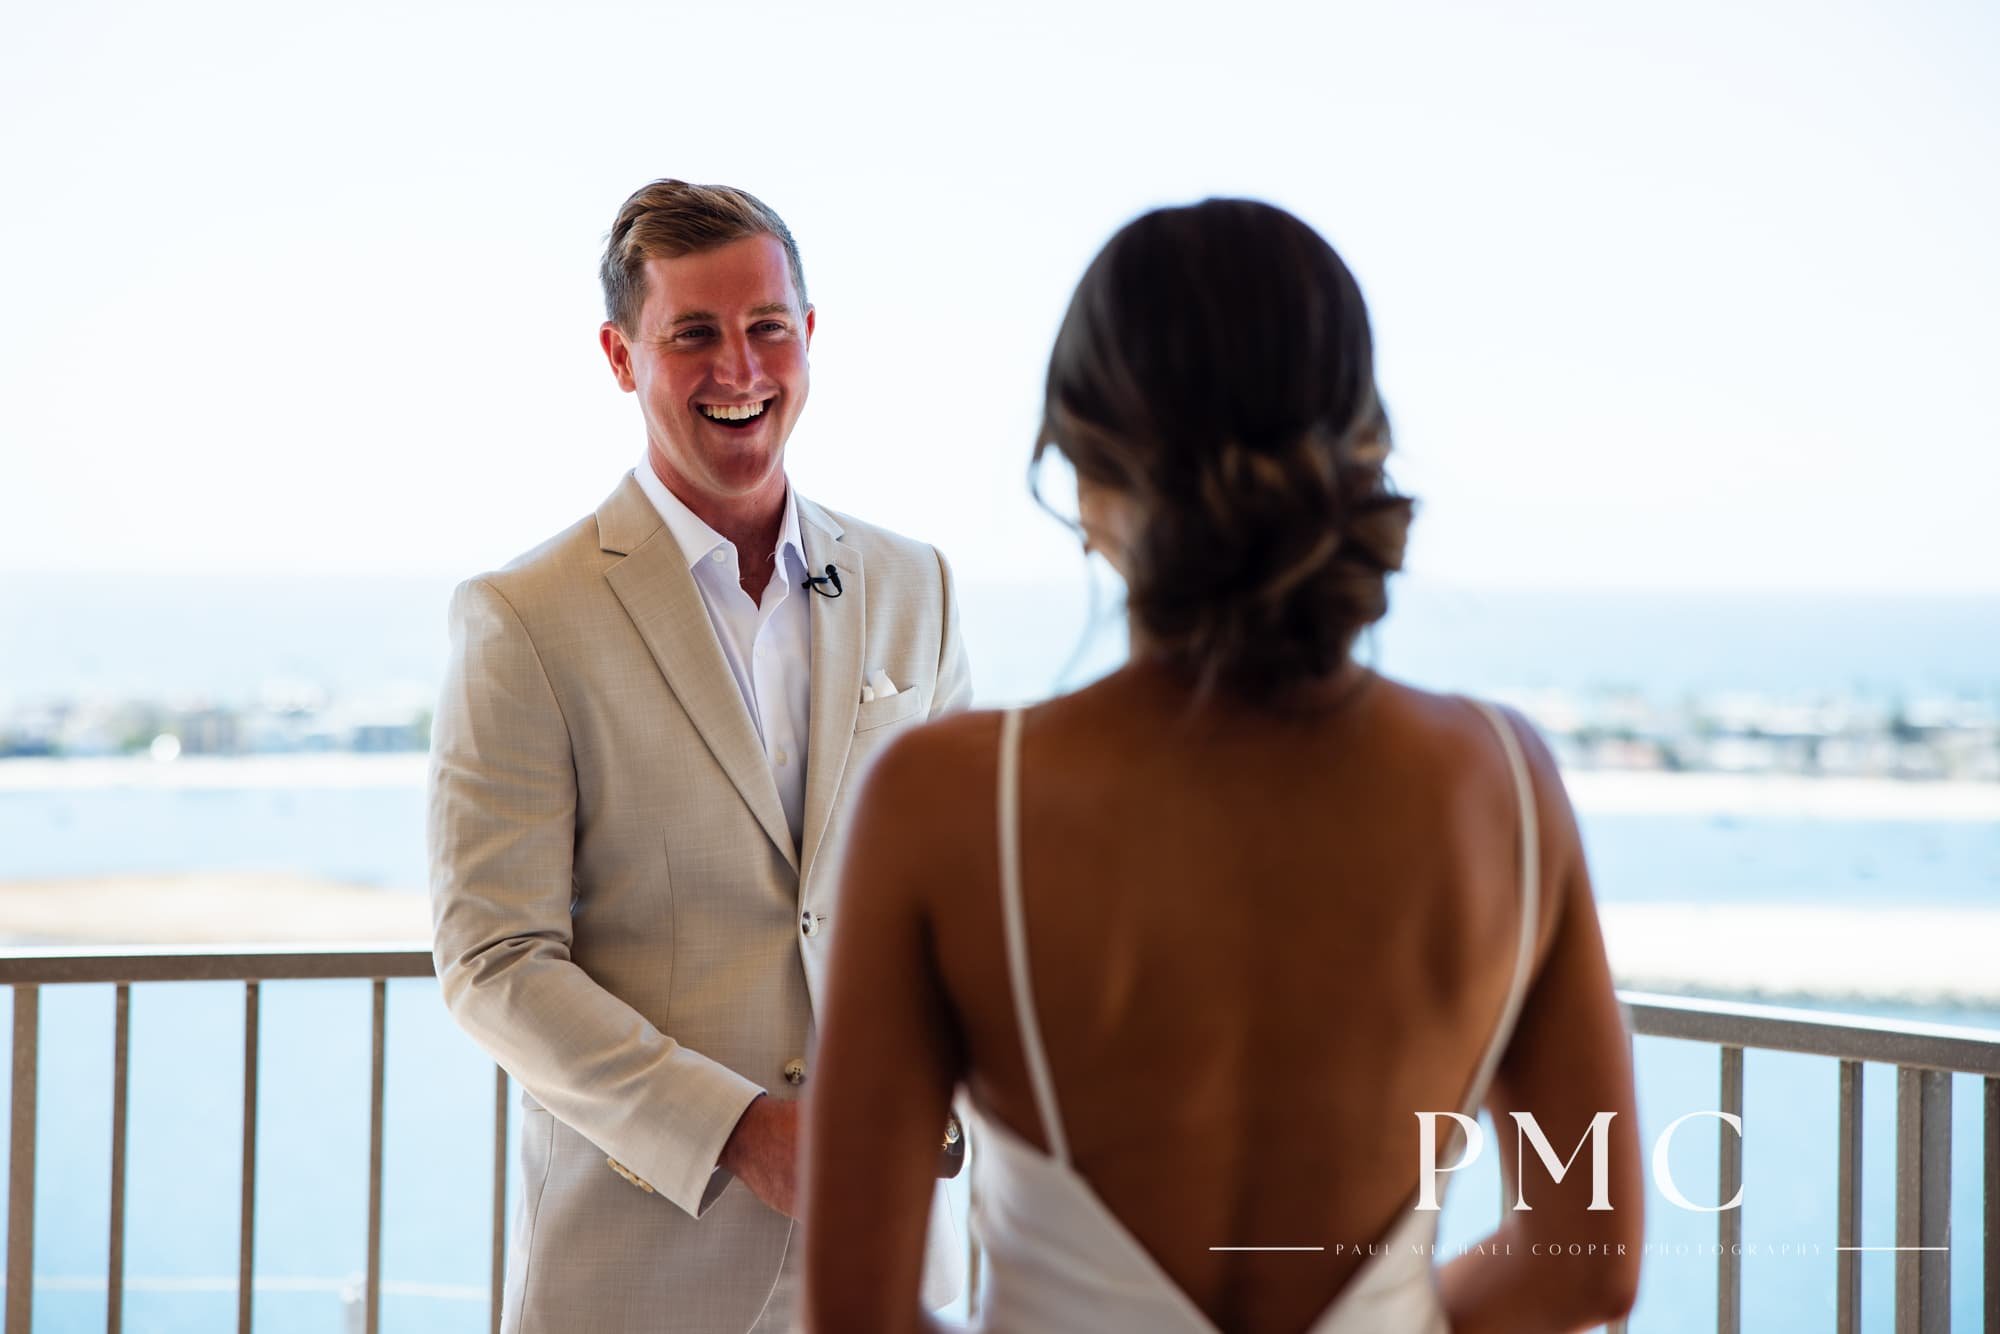 A groom smiles wide at his bride during their wedding day first look on the balcony of the Hyatt Regency Mission Bay.